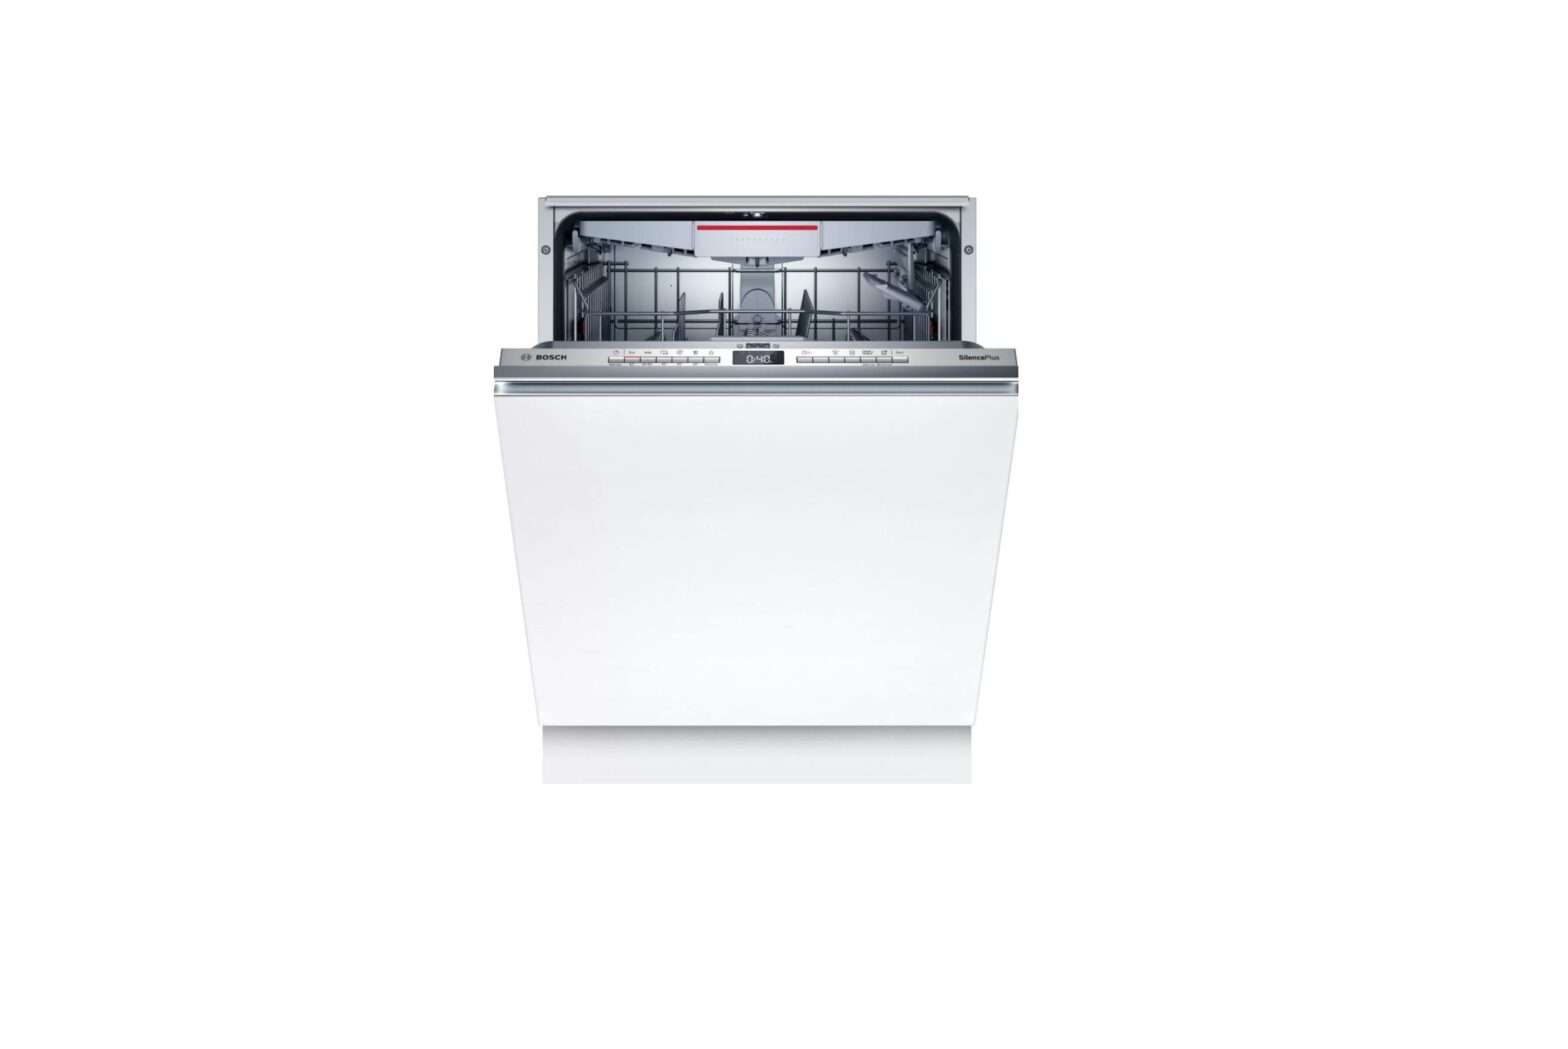 BOSCH SGV4HCX48E Dishwasher Instruction Manual - Featured image